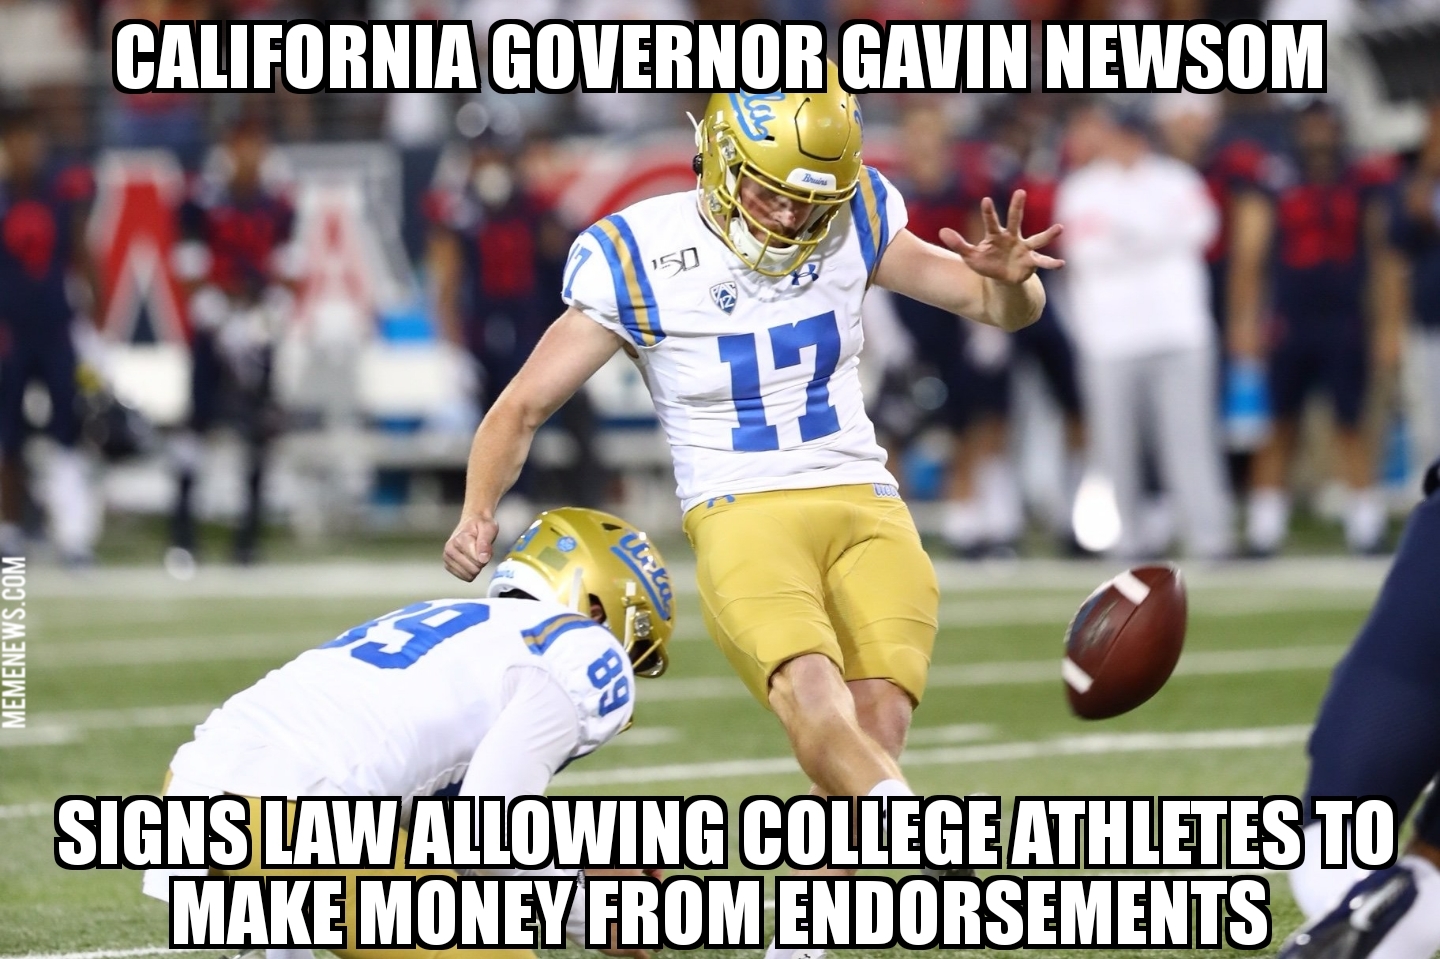 California governor signs law allowing college athletes to make money